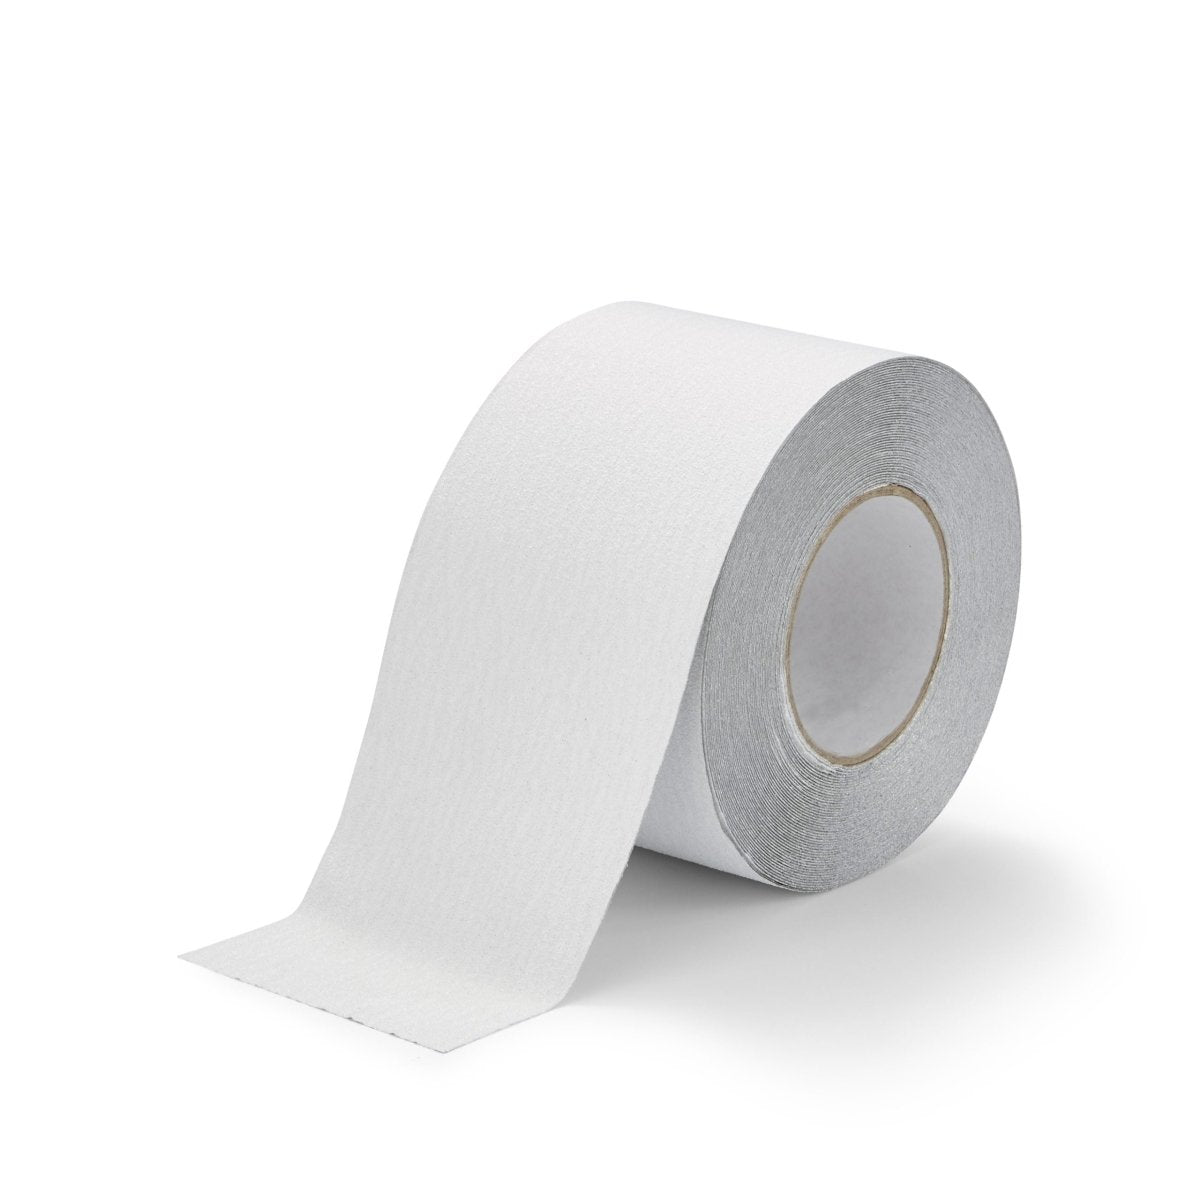 Conformable Traction Grade Anti Slip Tape Rolls - Slips Away - Conformable Anti-Slip Tape - H3406W-Conformable-Grip-White-100mm-1-1 -